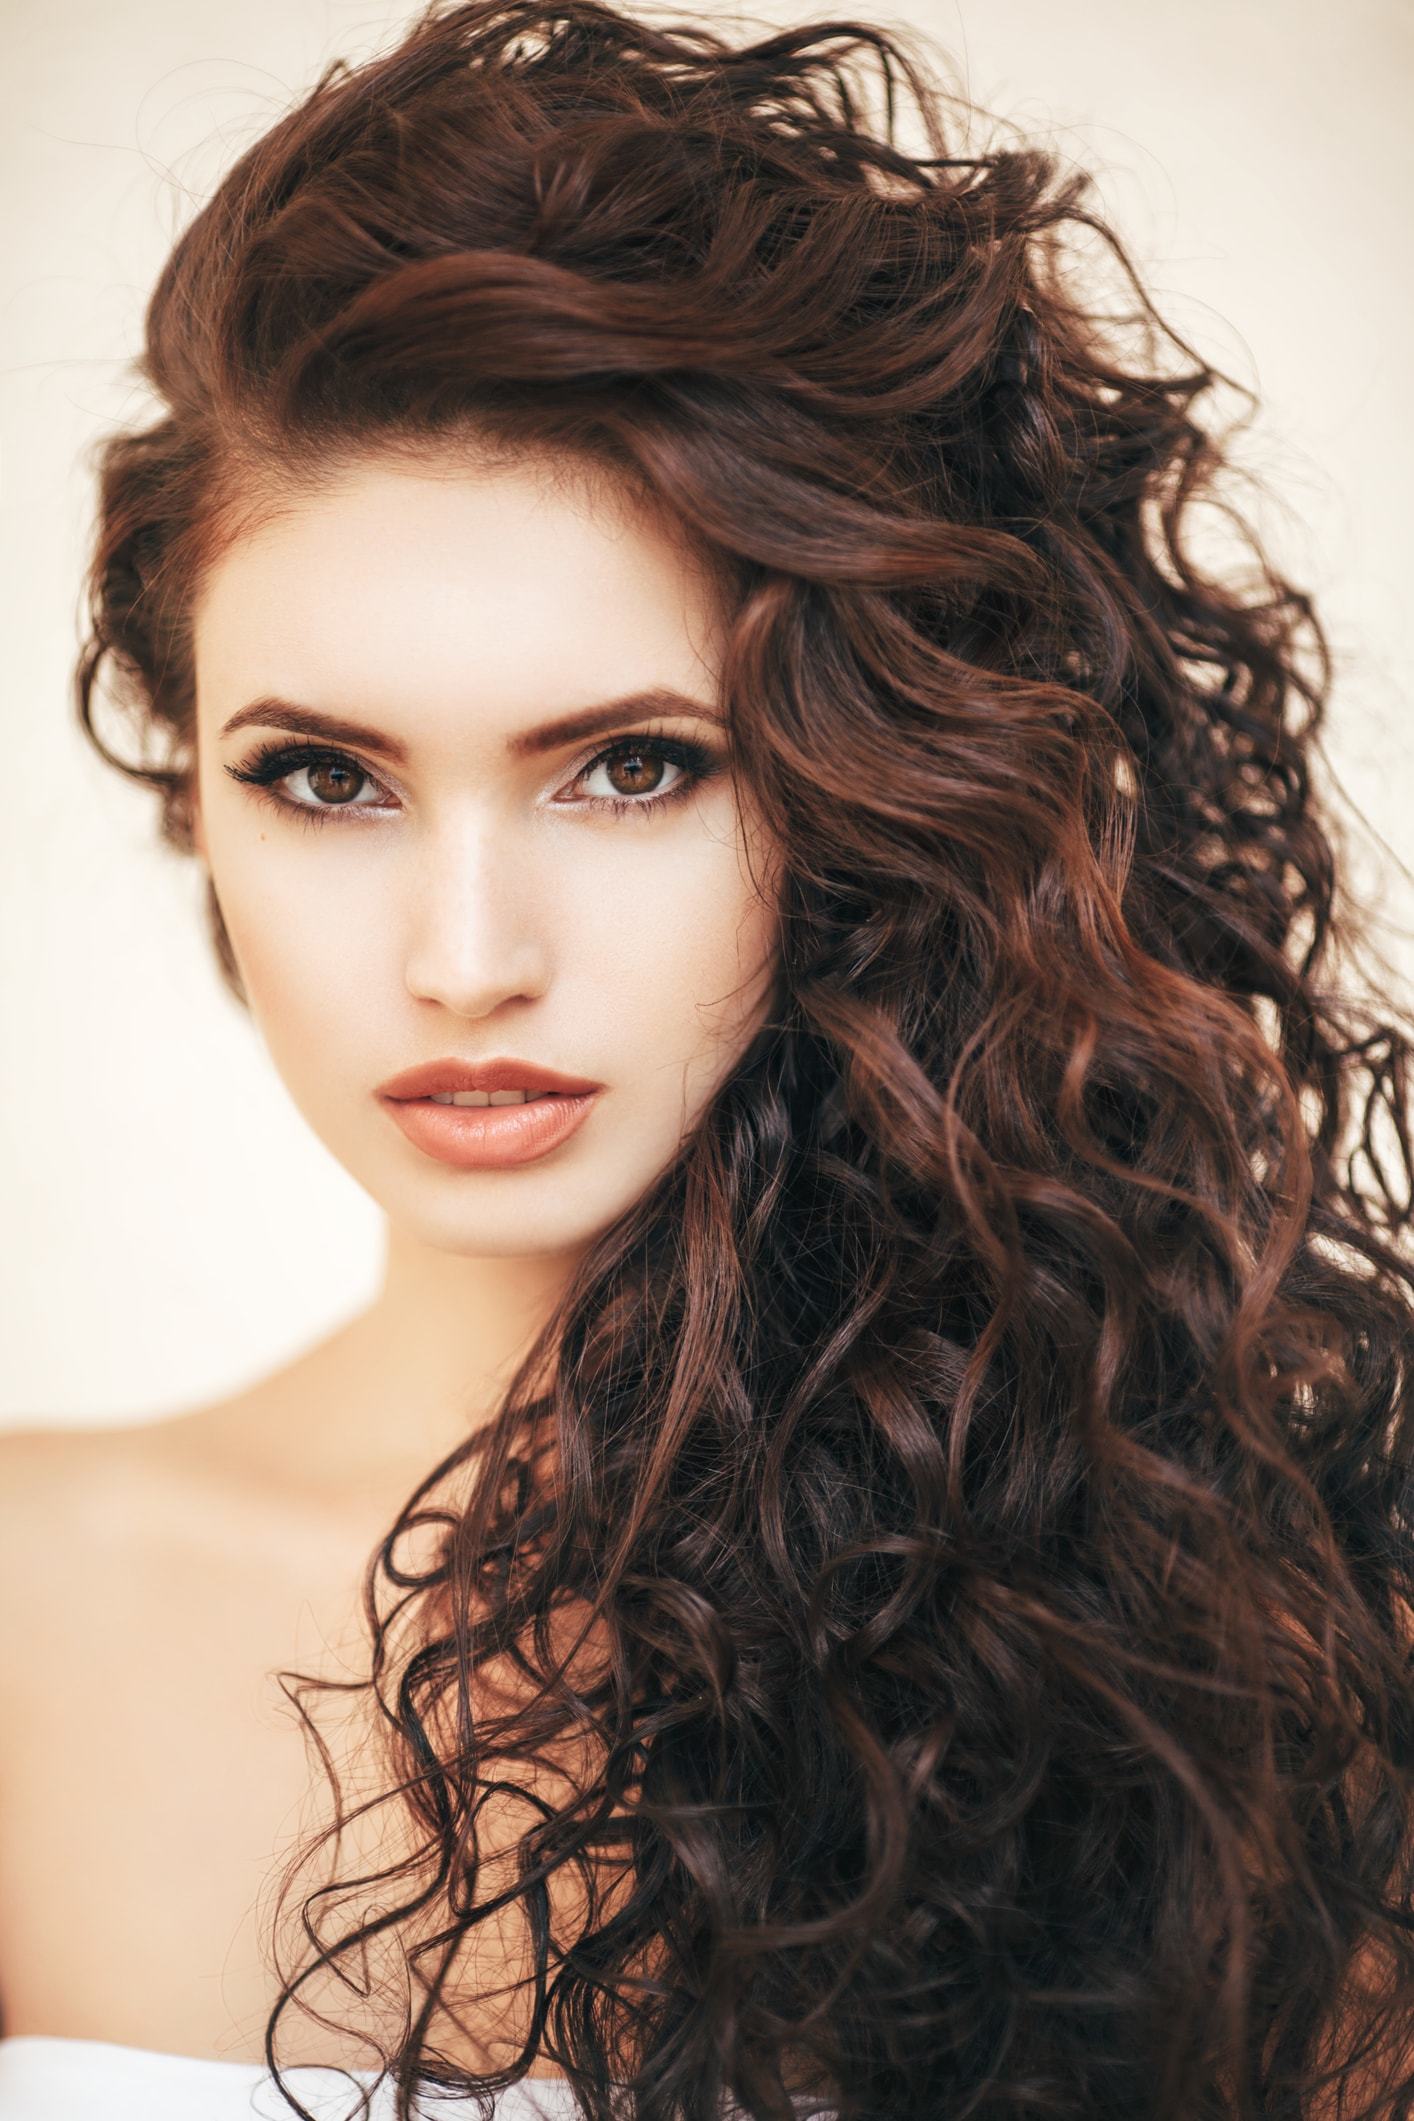 Curly/Wavy Hair: Wash Day Tips For Soft Frizz-Free Curls - Colleen Charney